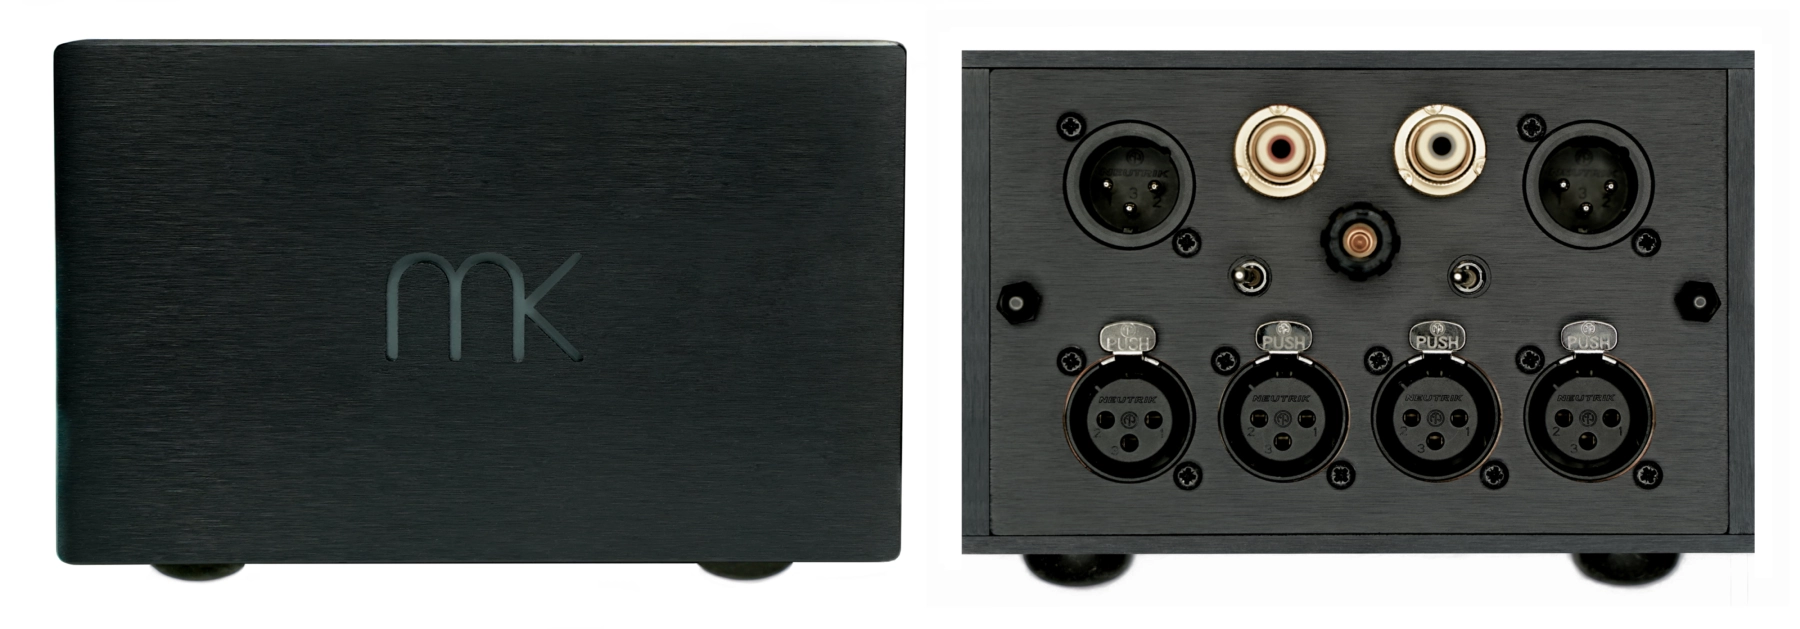 MK Analogue Step-up Transformer SUT-1M – front and back